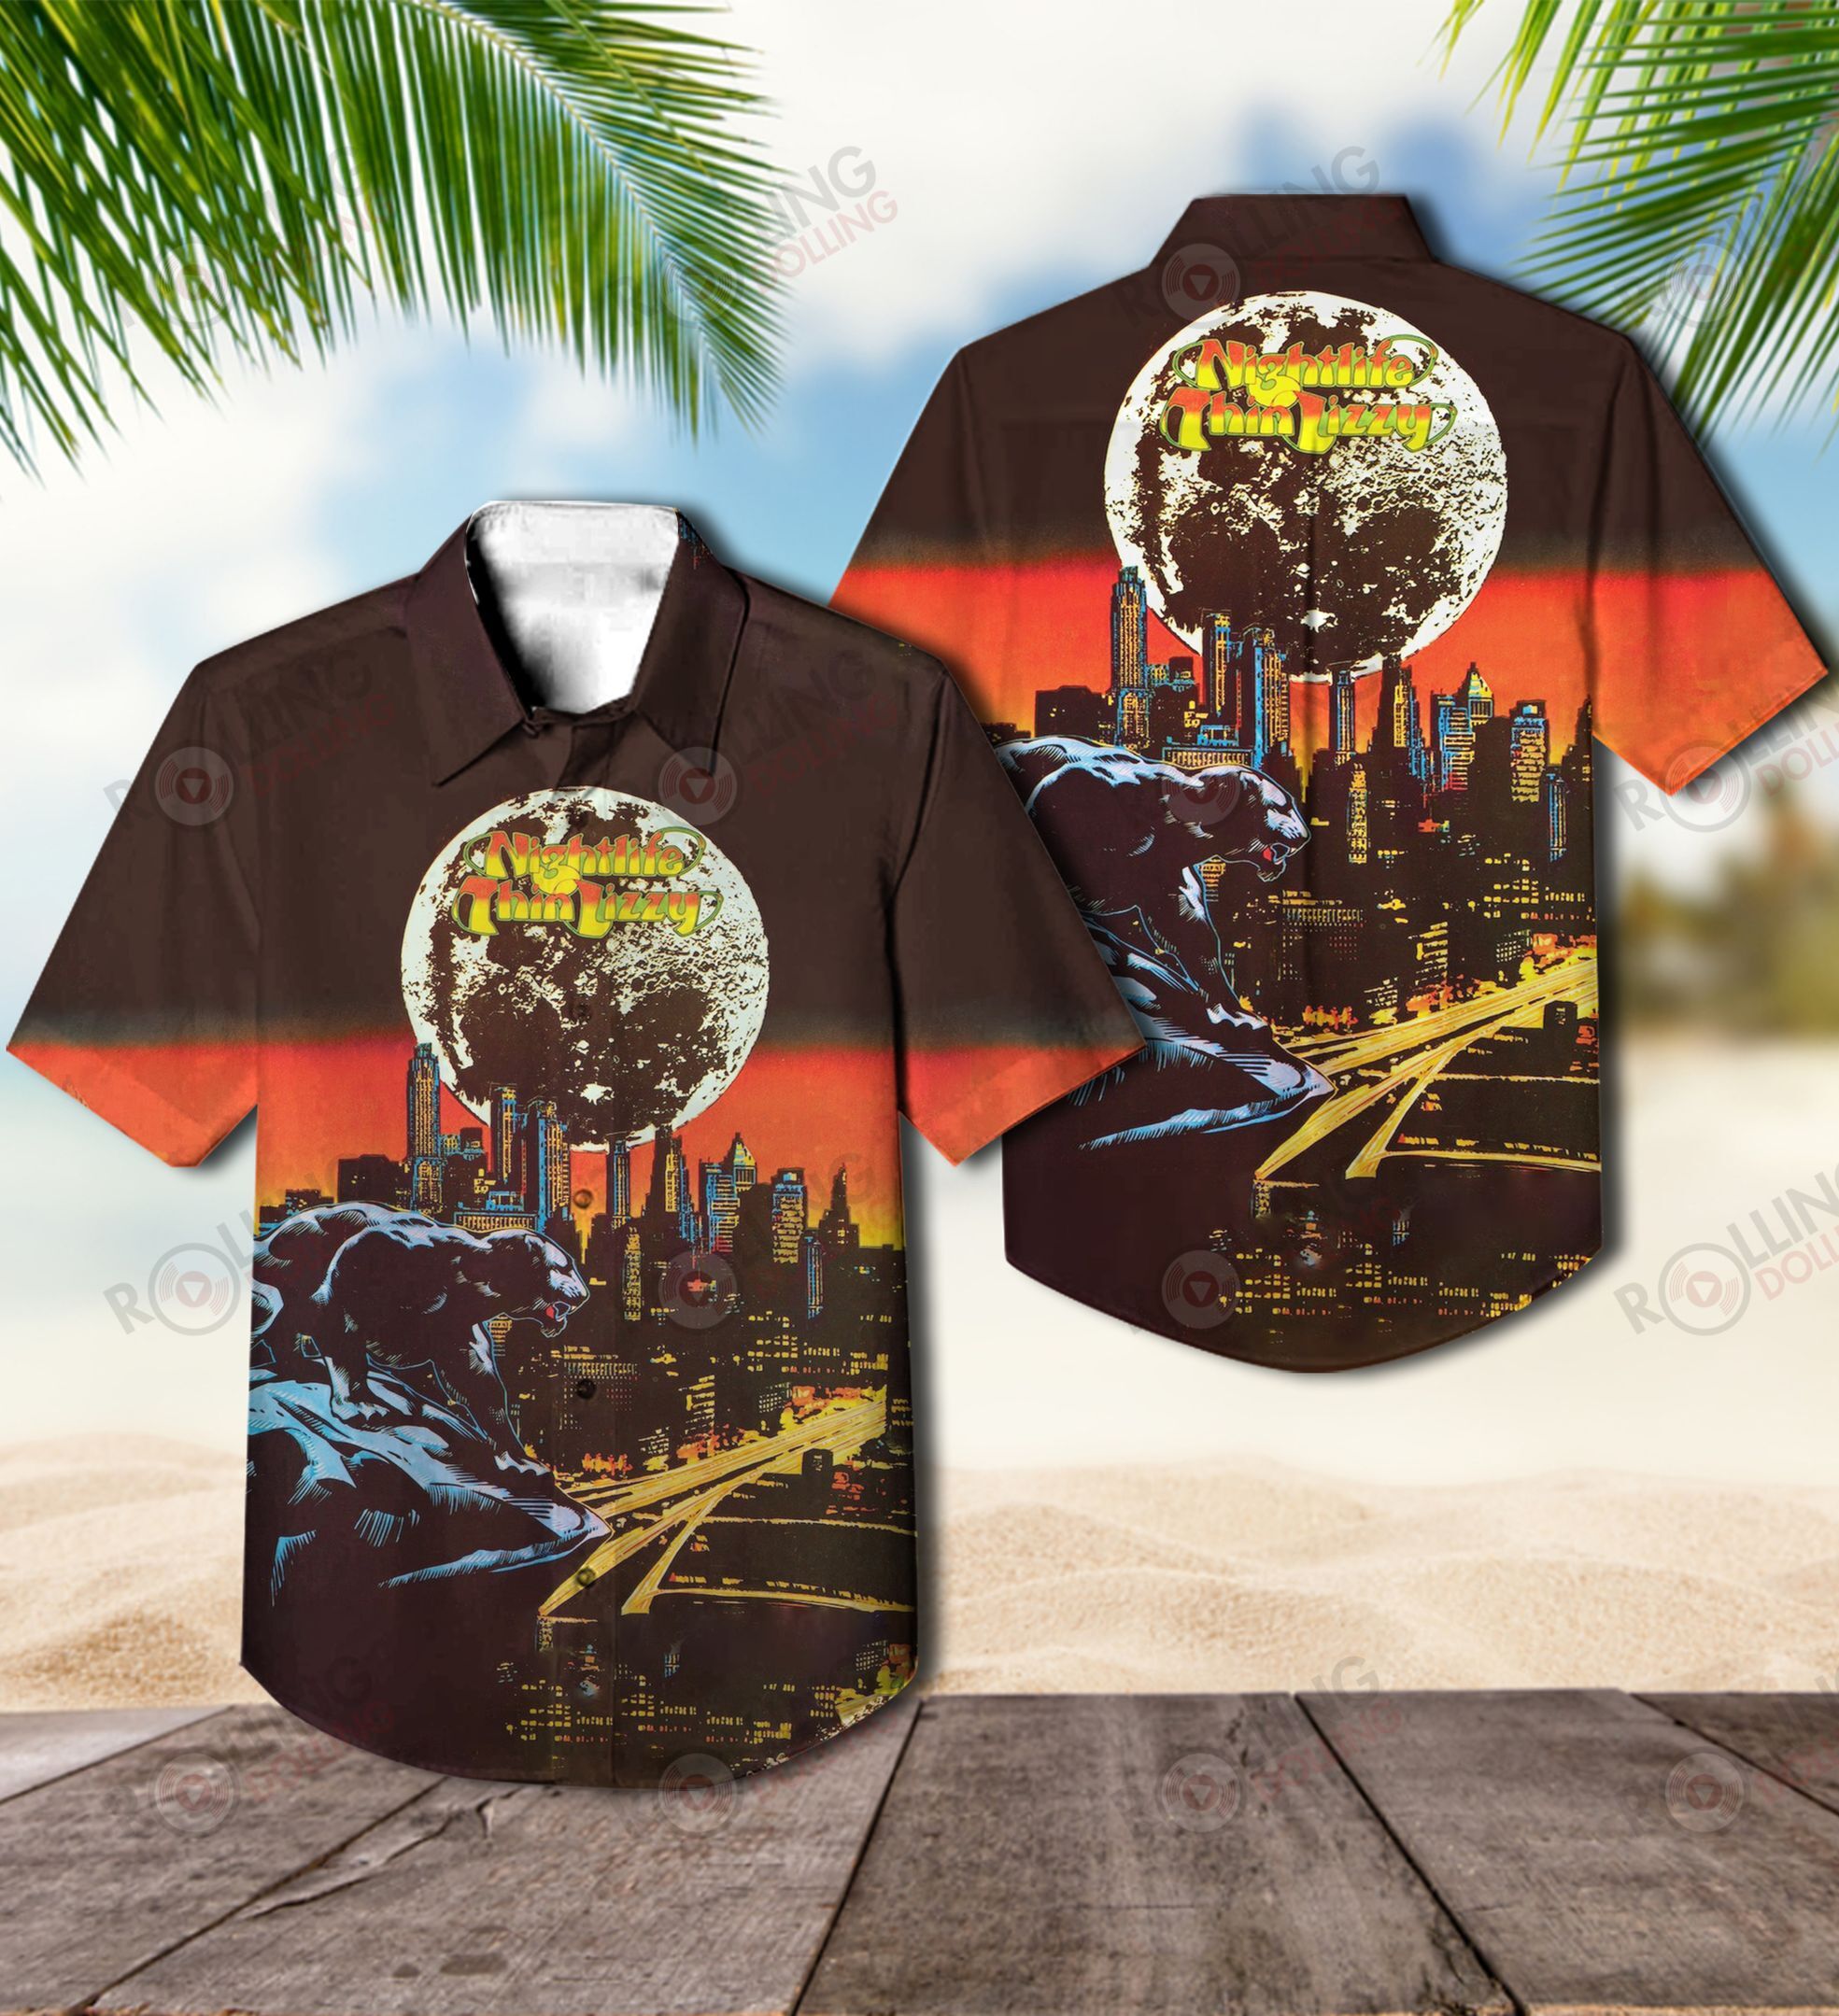 This would make a great gift for any fan who loves Hawaiian Shirt as well as Rock band 215